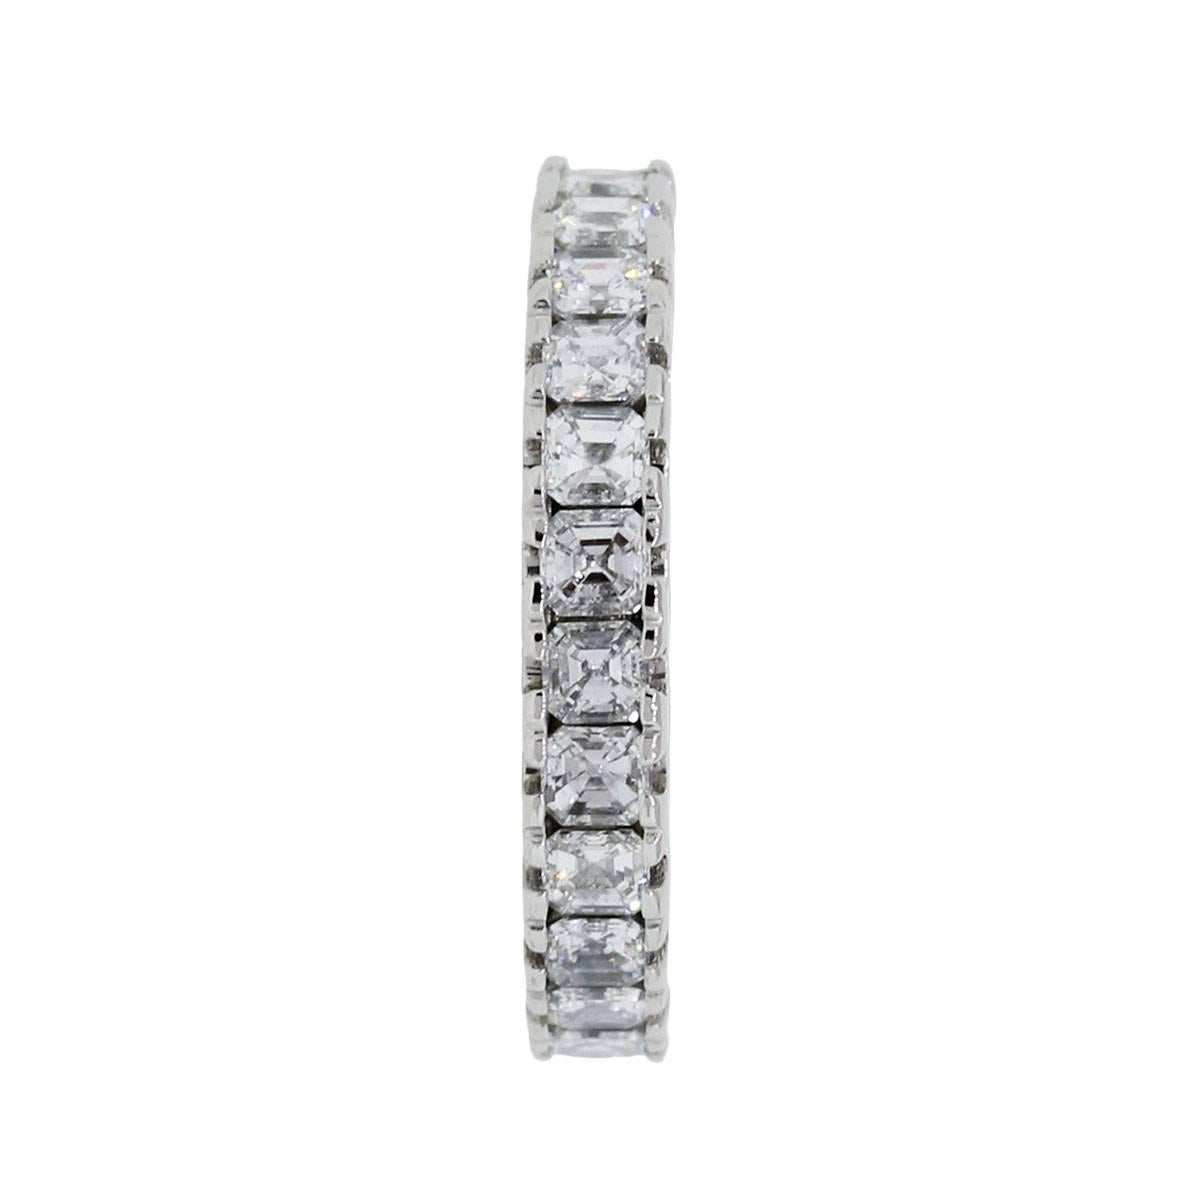 Material: Platinum
Diamond Details: Approximately 2.60ctw of asscher cut diamonds. Diamonds are G/H in color and VS in clarity
Ring Size: 6.50
Ring Measurements: 0.89″ x 0.14″ x 0.89″
Total Weight: 6.9g (4.5dwt)
Additional Details: This item comes